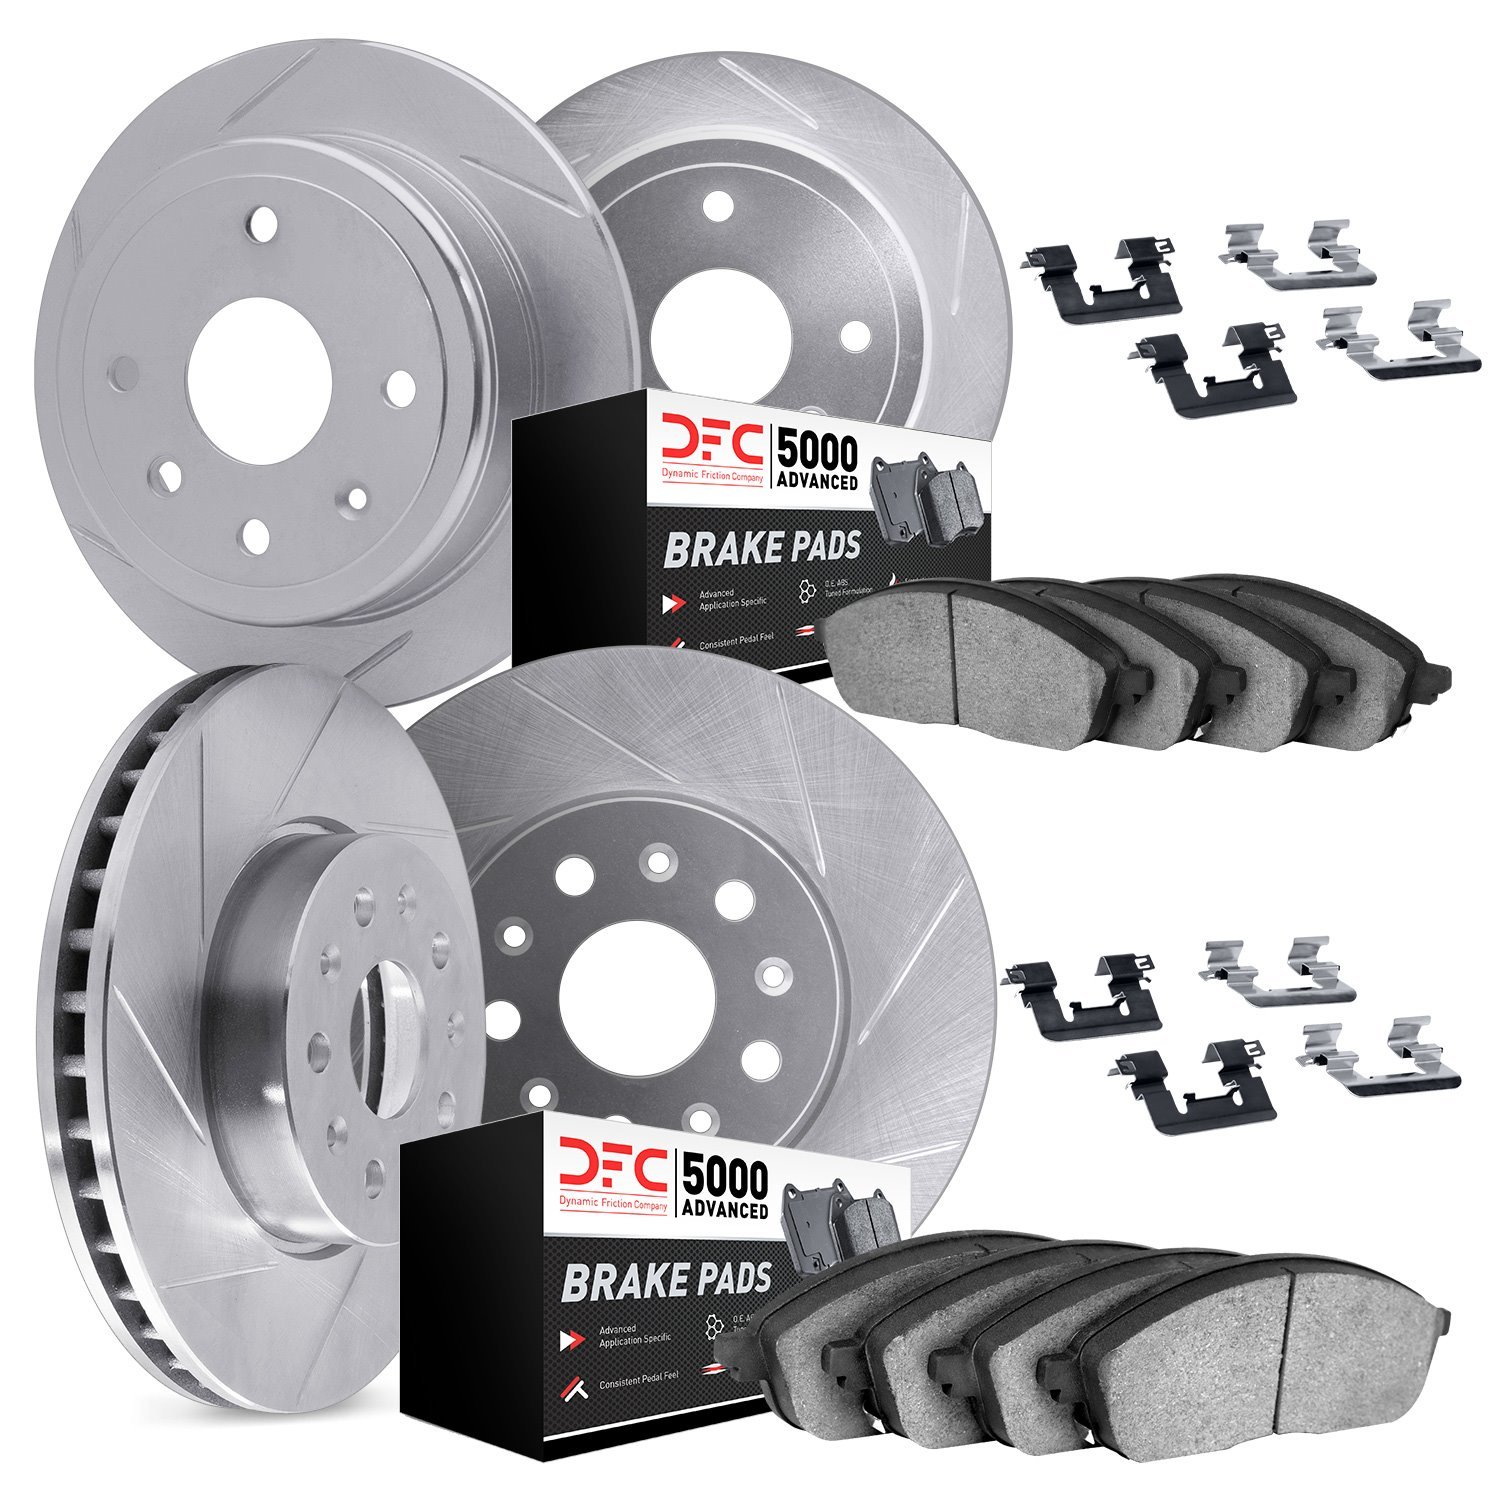 5514-59060 Slotted Brake Rotors w/5000 Advanced Brake Pads Kit & Hardware [Silver], 2007-2012 Acura/Honda, Position: Front and R